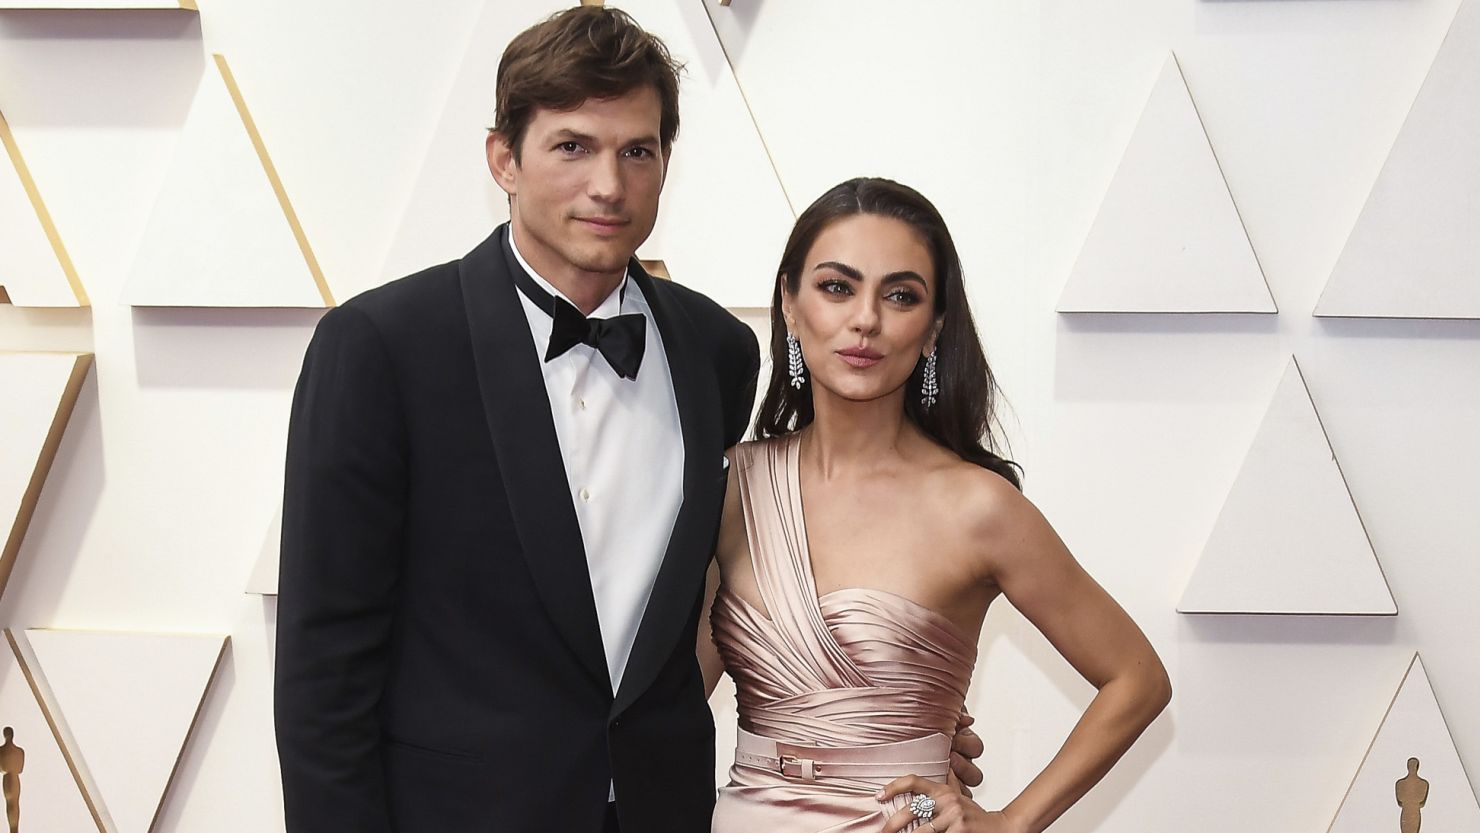 Ashton Kutcher and Mila Kunis at the Oscars in March.